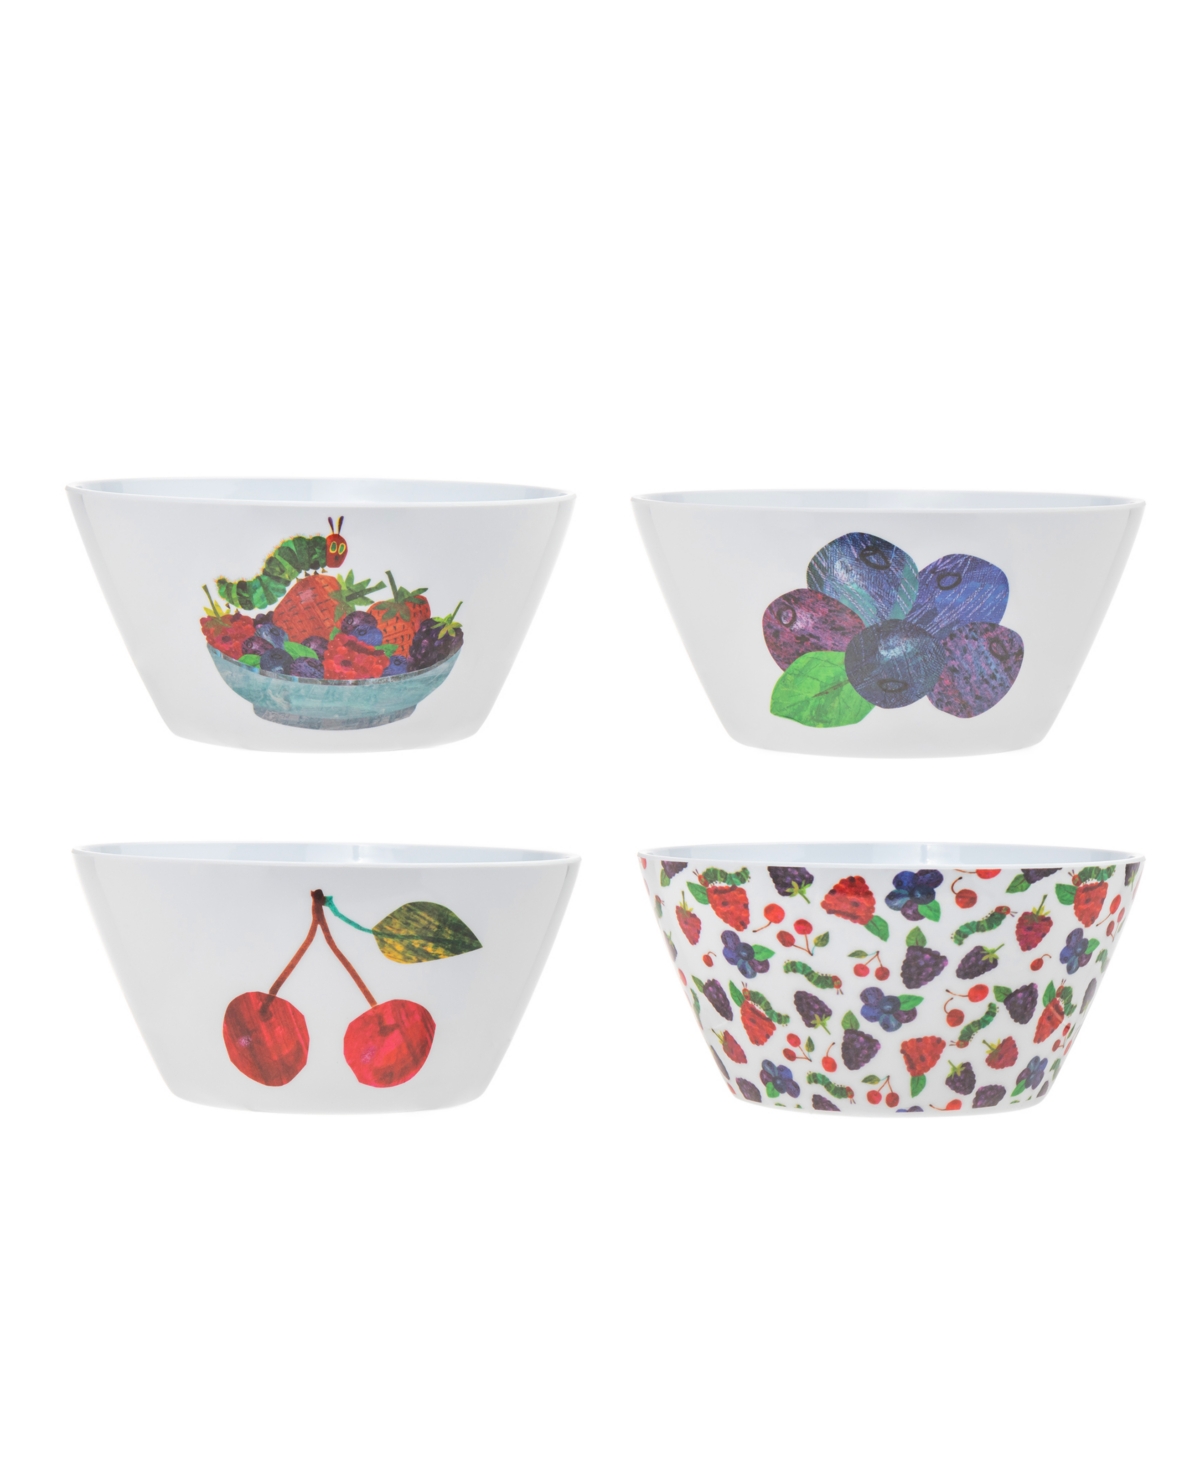 The World of Eric Carle, The Very Hungry Caterpillar Berry Cereal Bowl, Set of 4 - White